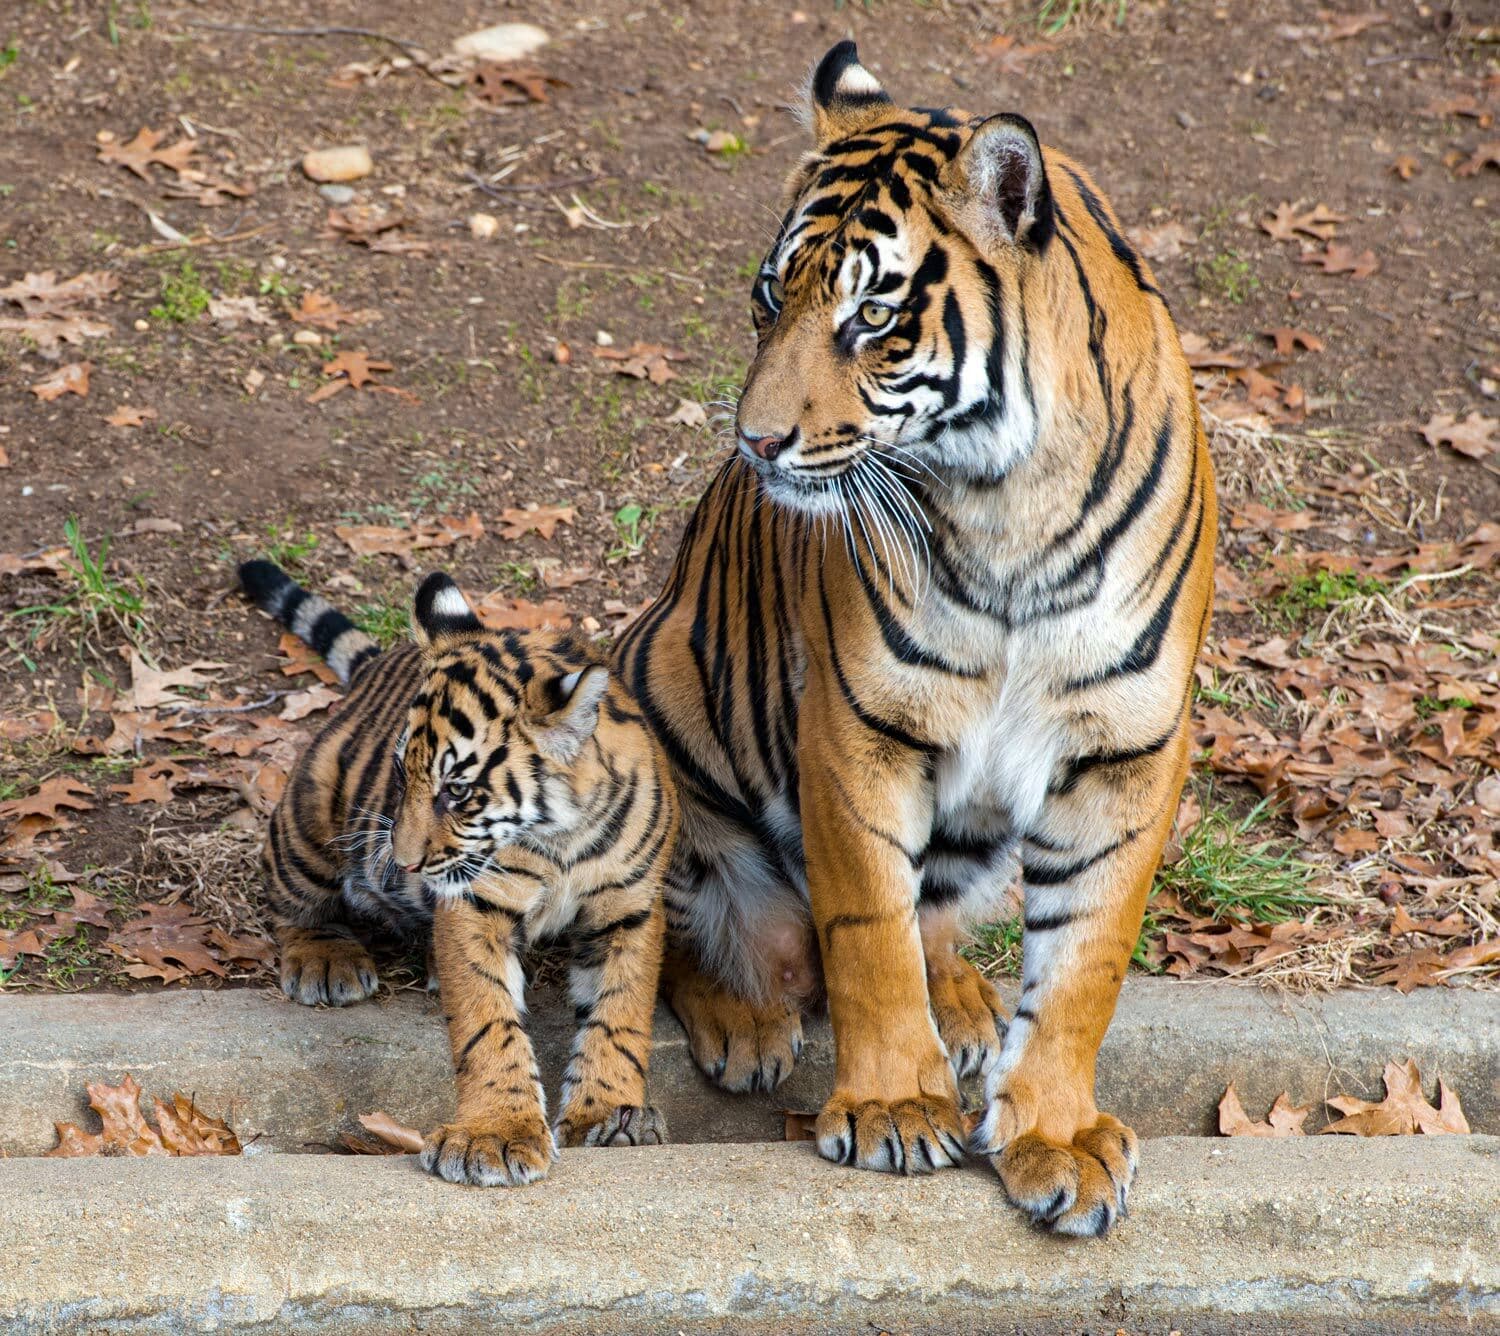 mother tiger with baby tiger